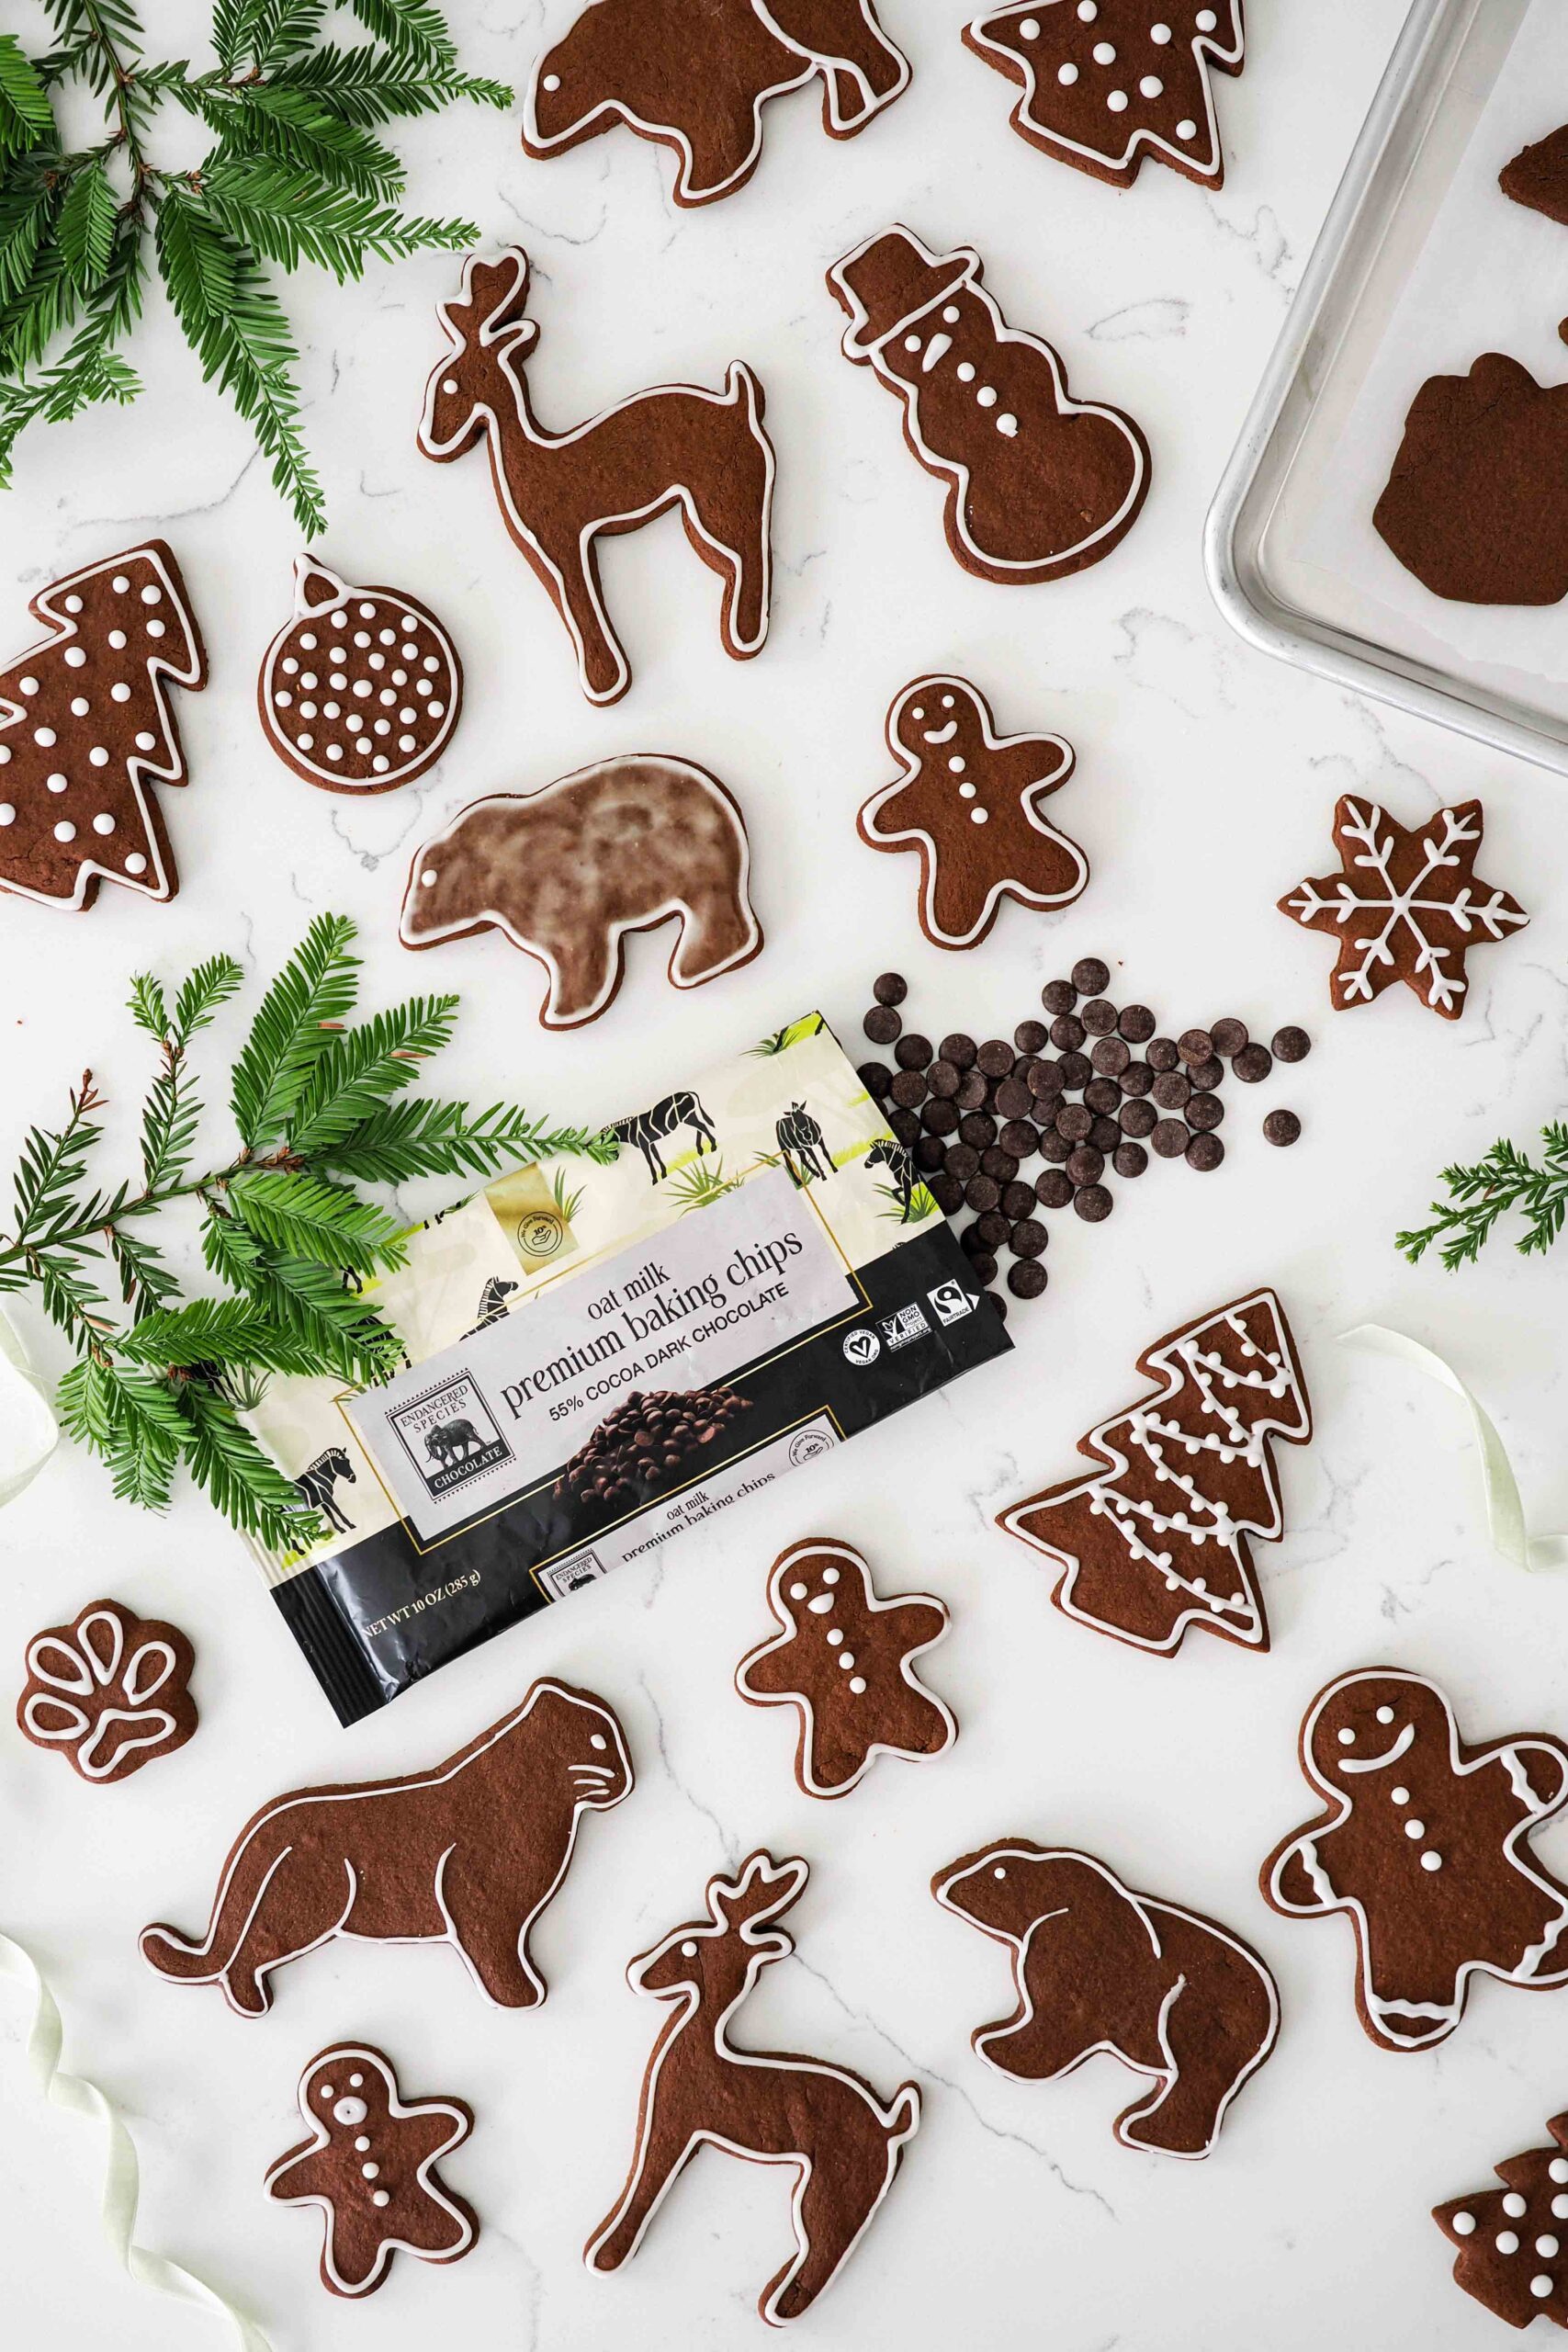 An overhead view of chocolate gingerbread cookies on a quartz counter with a bag of Endangered Species Chocolate baking chips and pine branches.